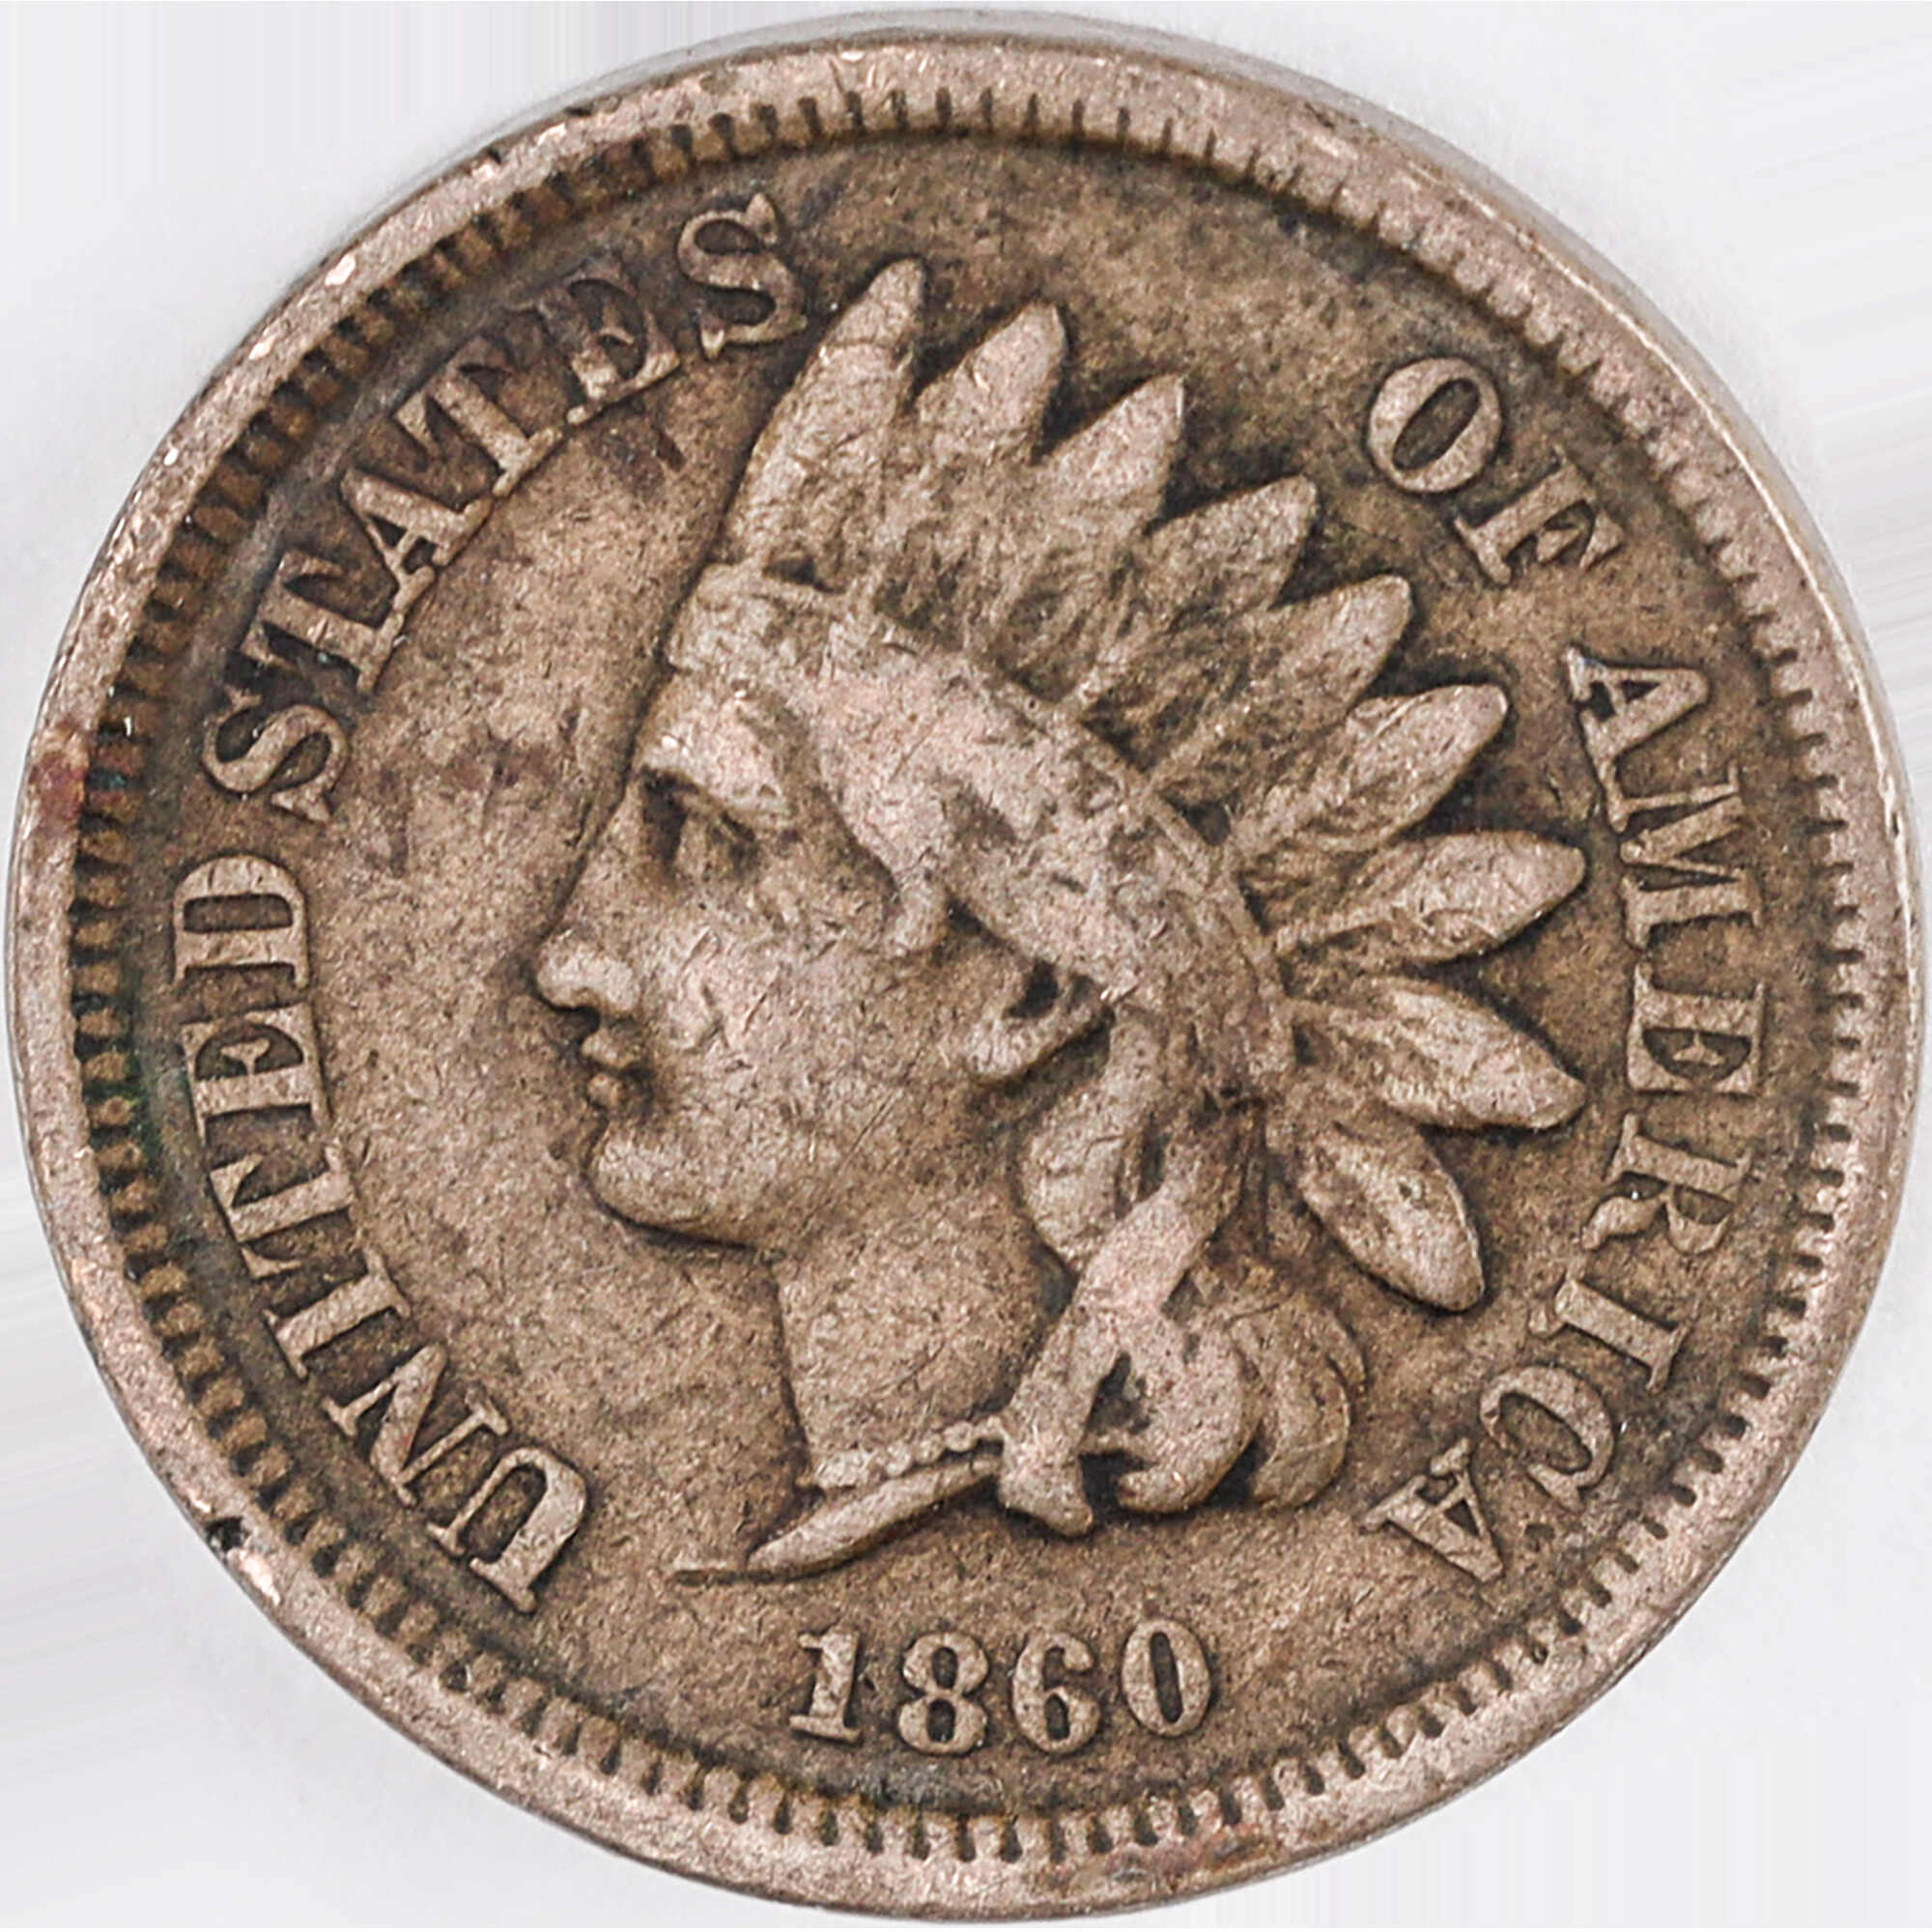 1860 Pointed Bust Indian Head Cent VG Copper-Nickel SKU:I12415